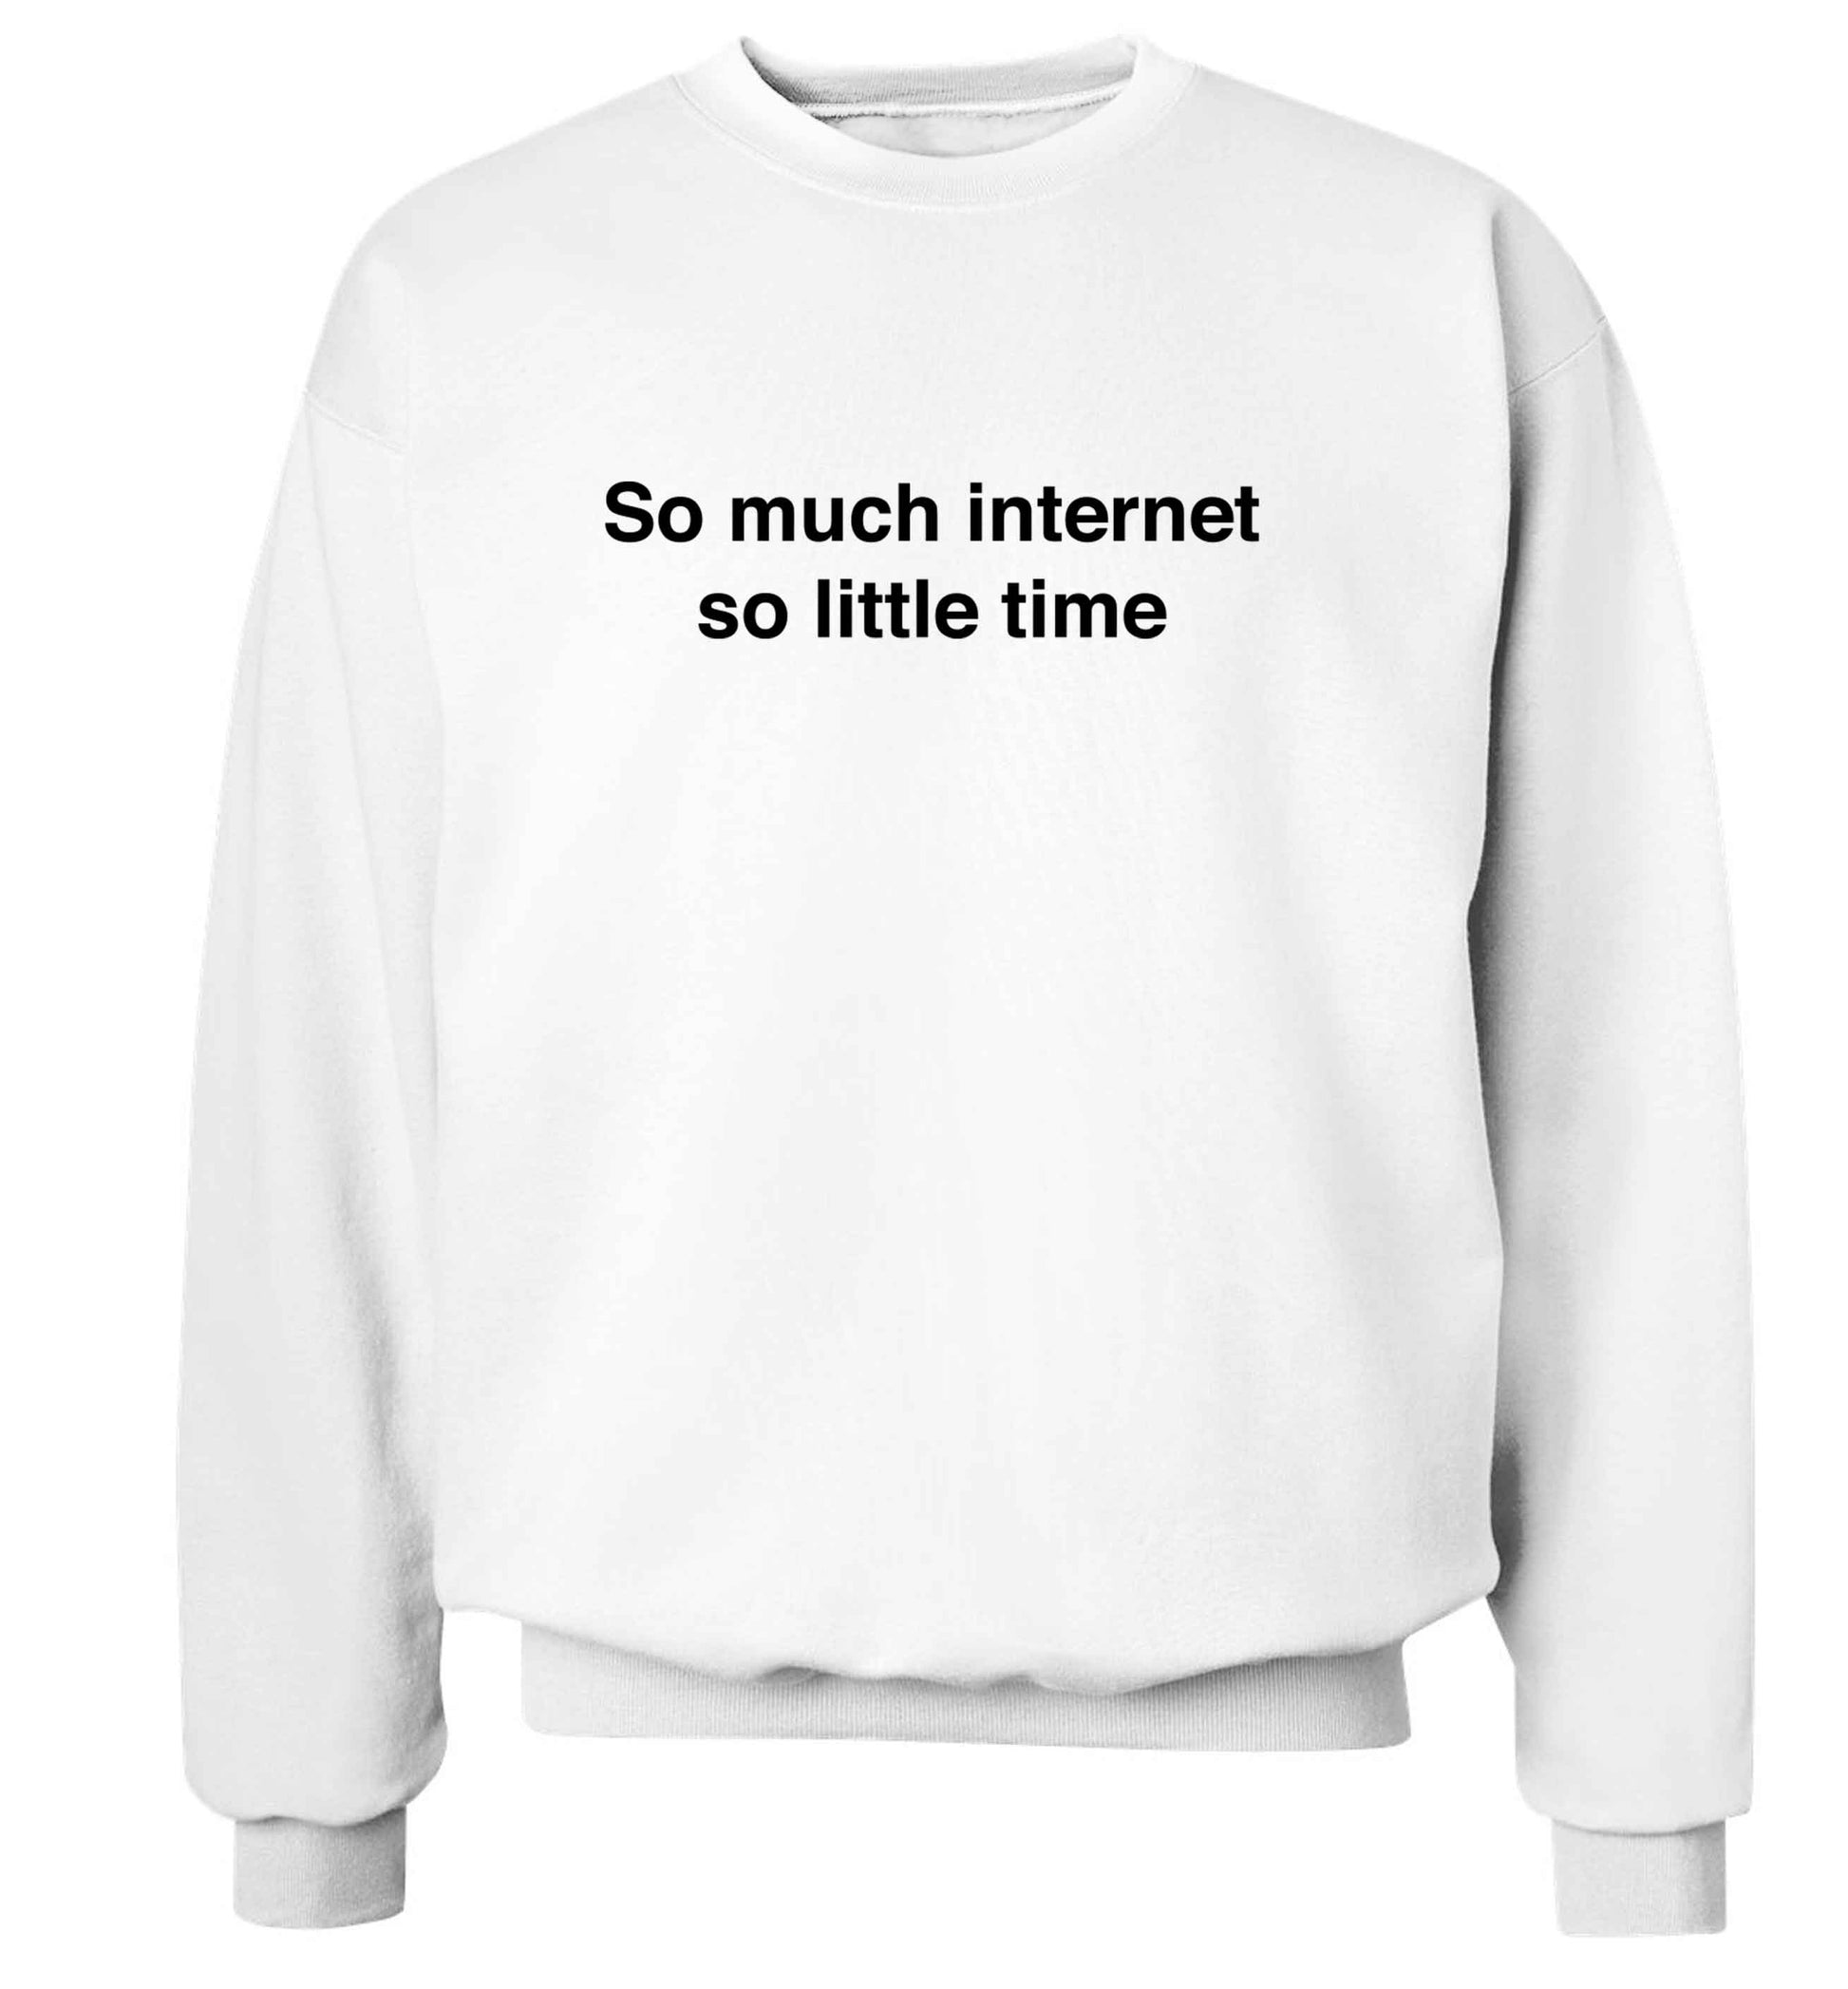 So much internet so little time adult's unisex white sweater 2XL